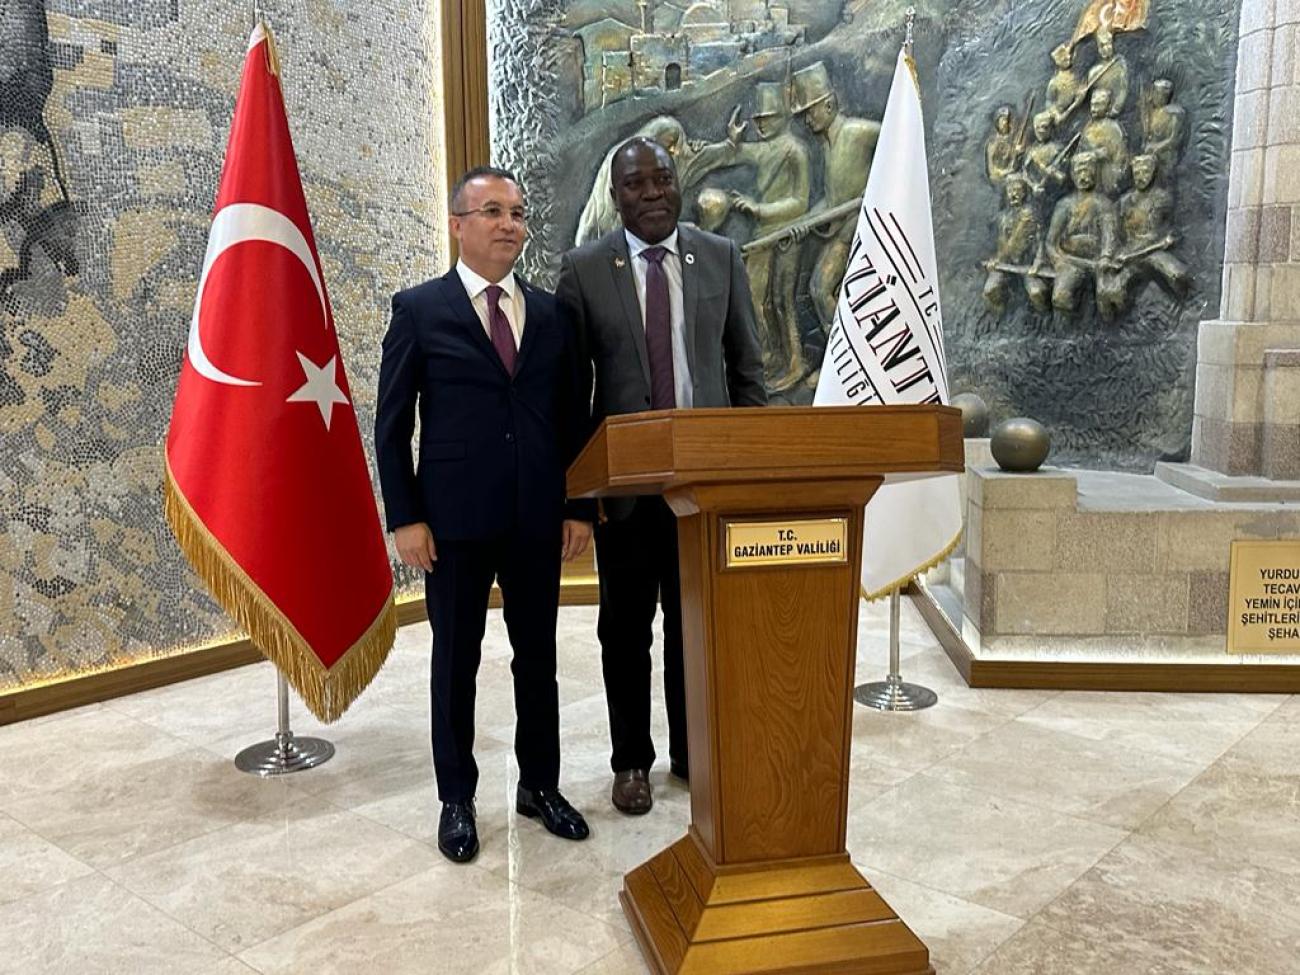 Governor of Gaziantep and RC Babatunde pose infront of a wall decoration. There is one Turkish flag and one flag which says Gaziantep behind them.